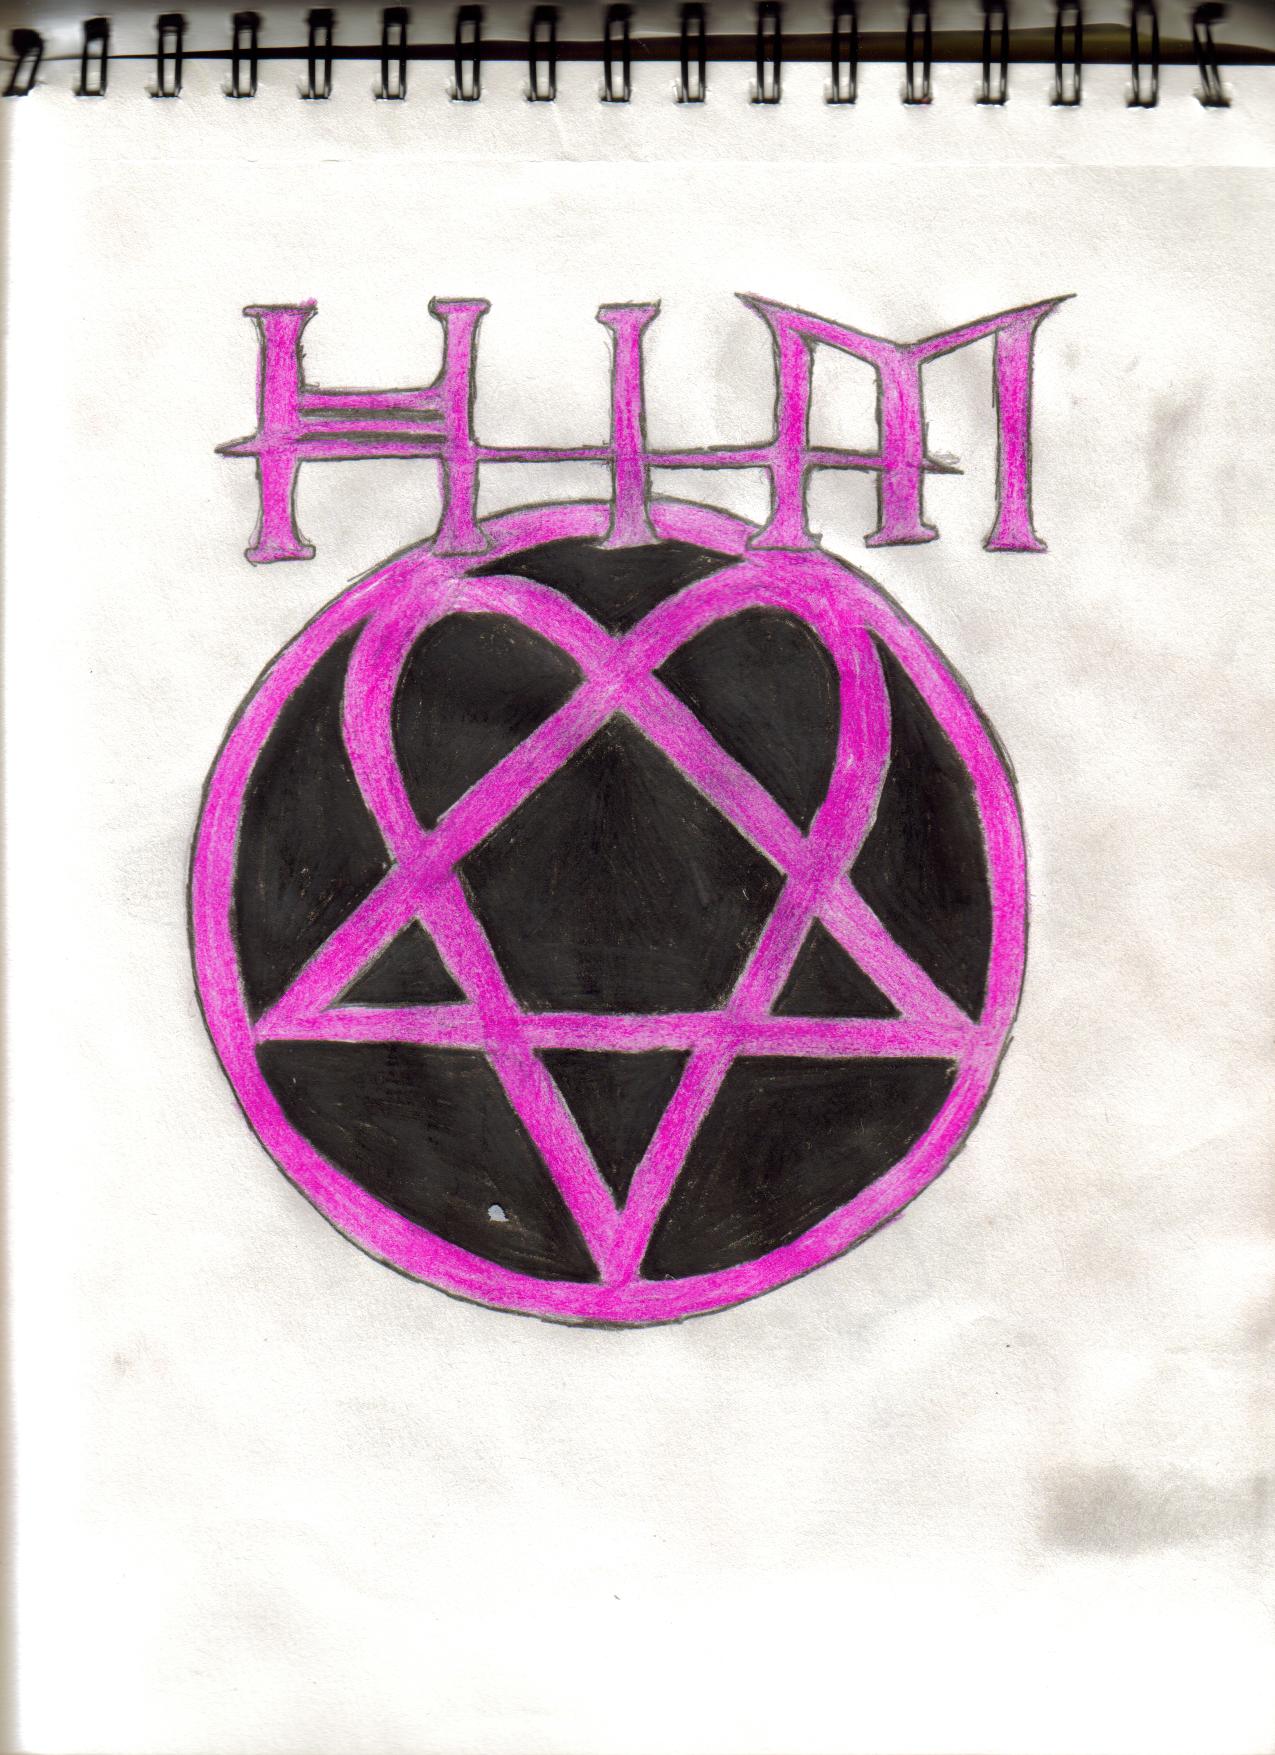 H.I.M. by Mcrluvr